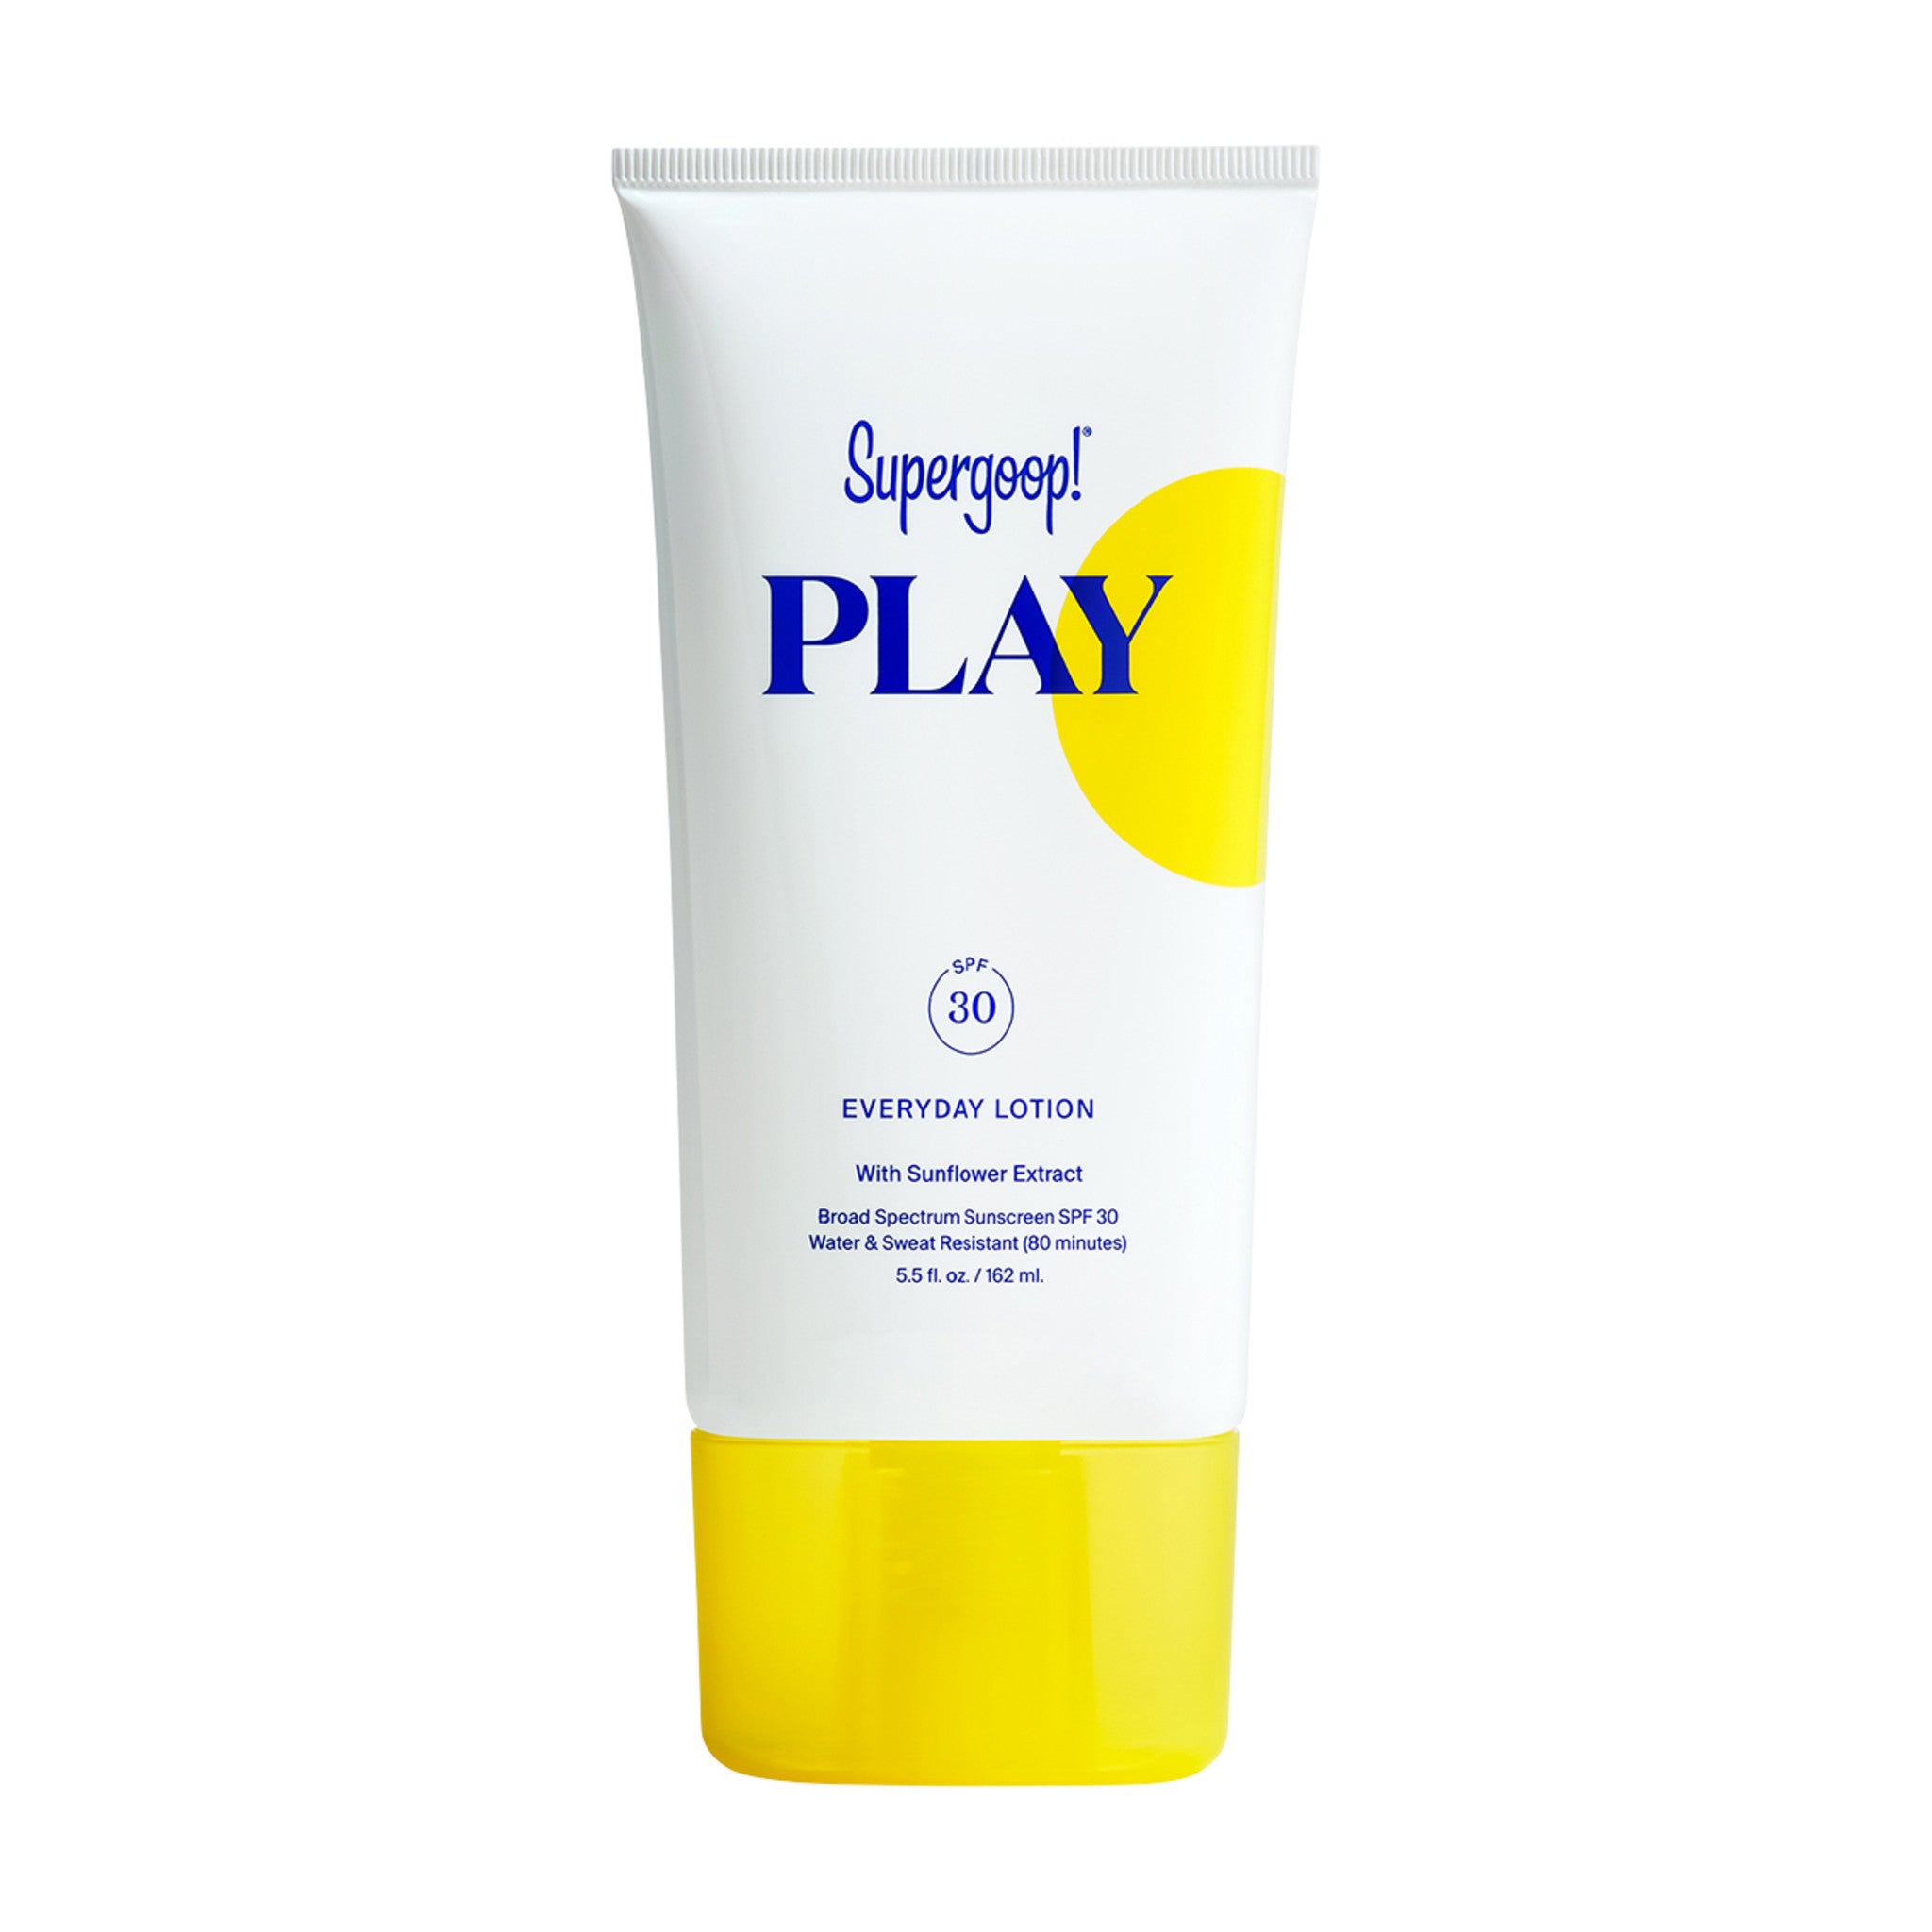 Play Everyday Lotion With Sunflower Extract SPF 30 main image.